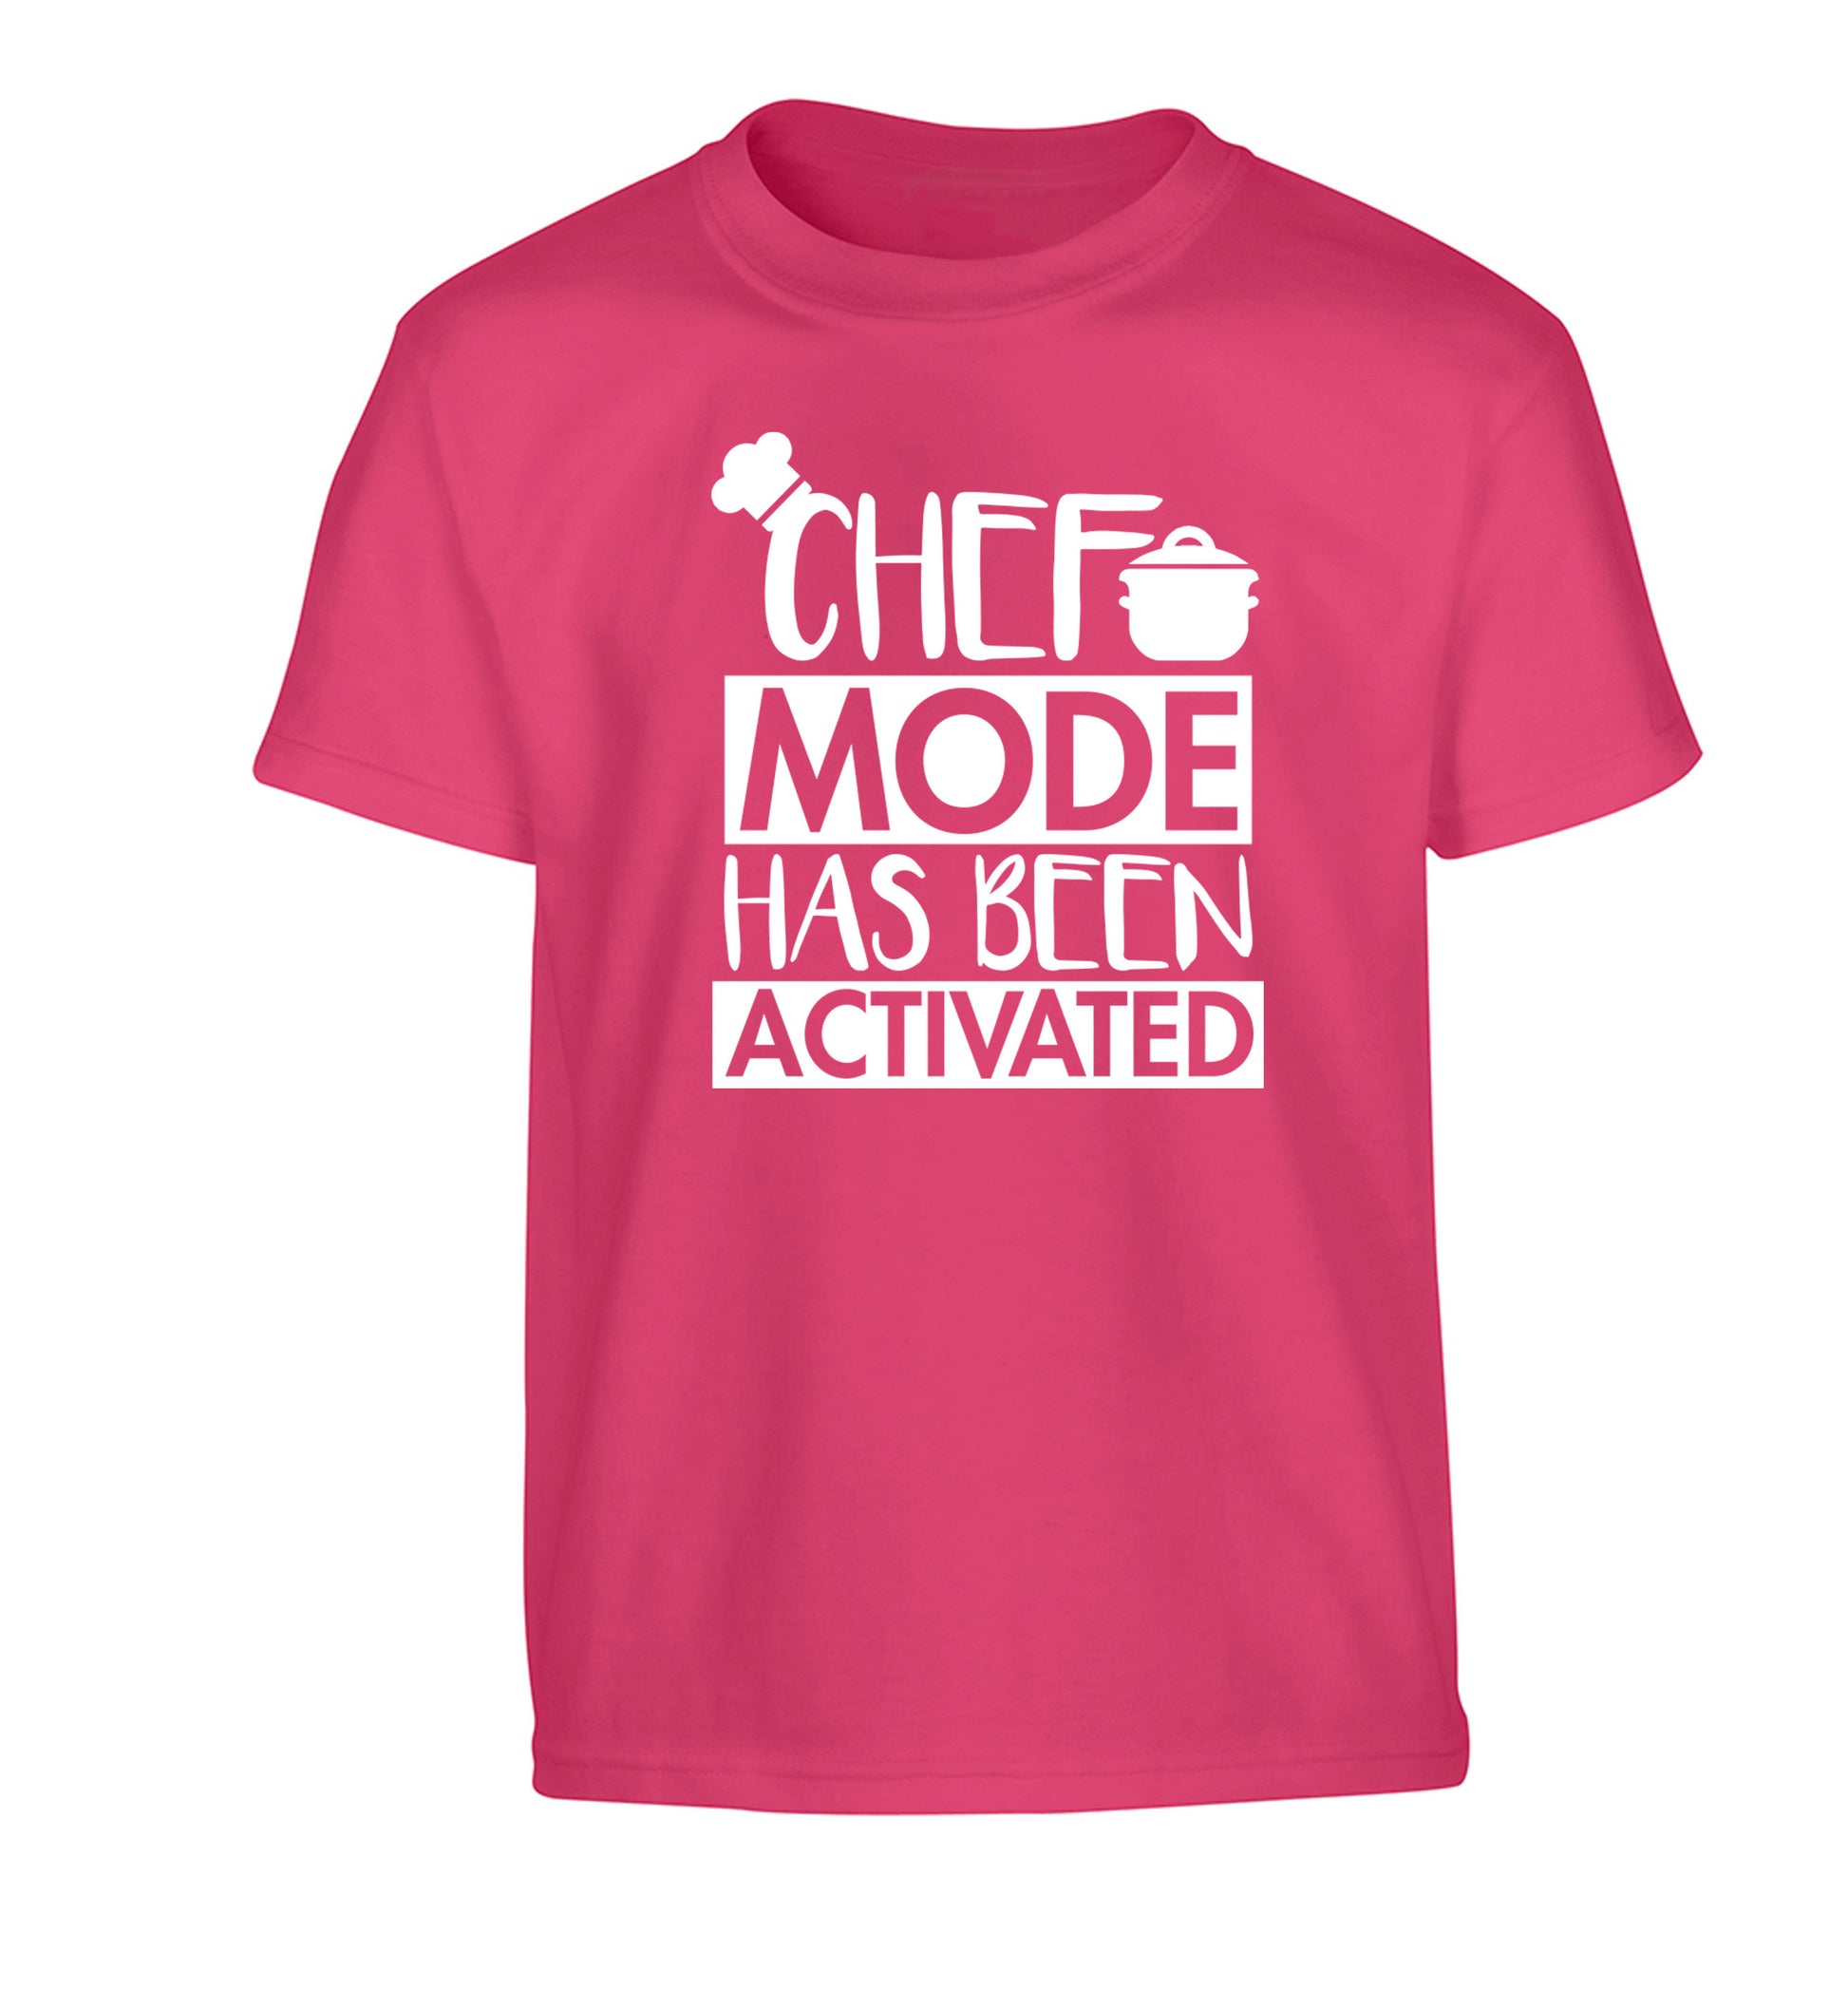 Chef mode has been activated Children's pink Tshirt 12-14 Years